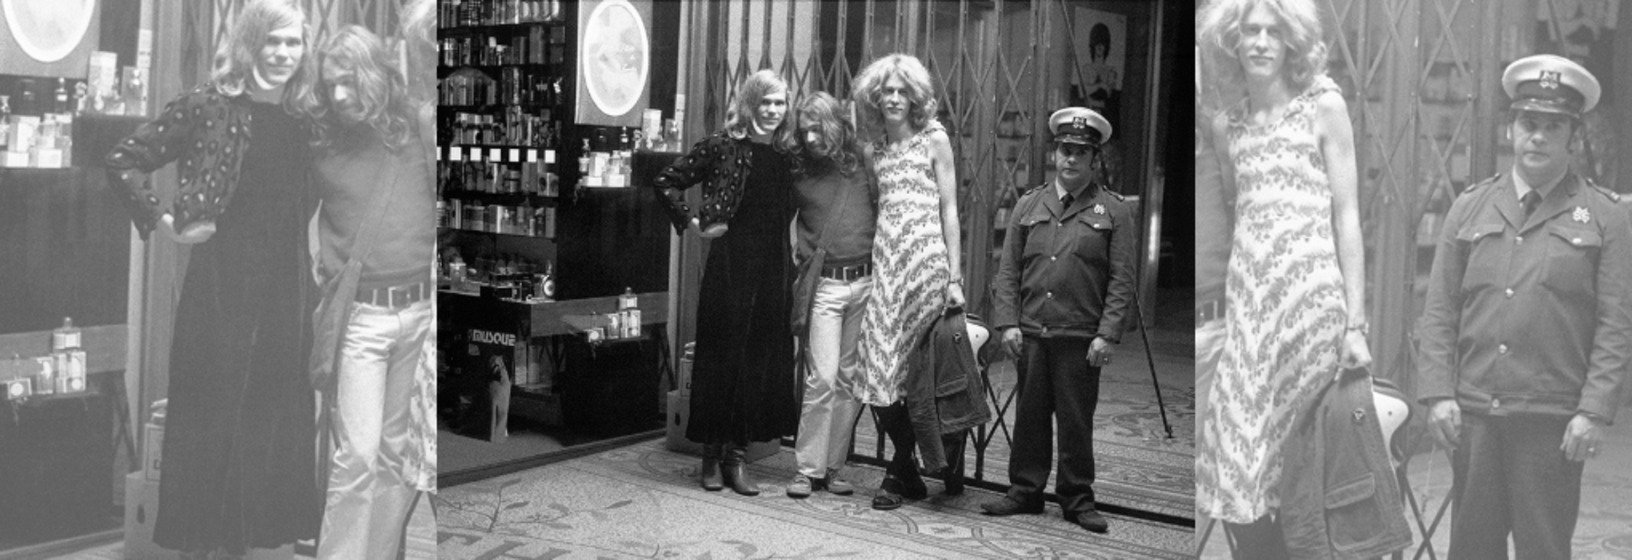 Black and white photograph of two men in drag, a male companion and a male security guard outside a shopfront, collaged to create a banner image.